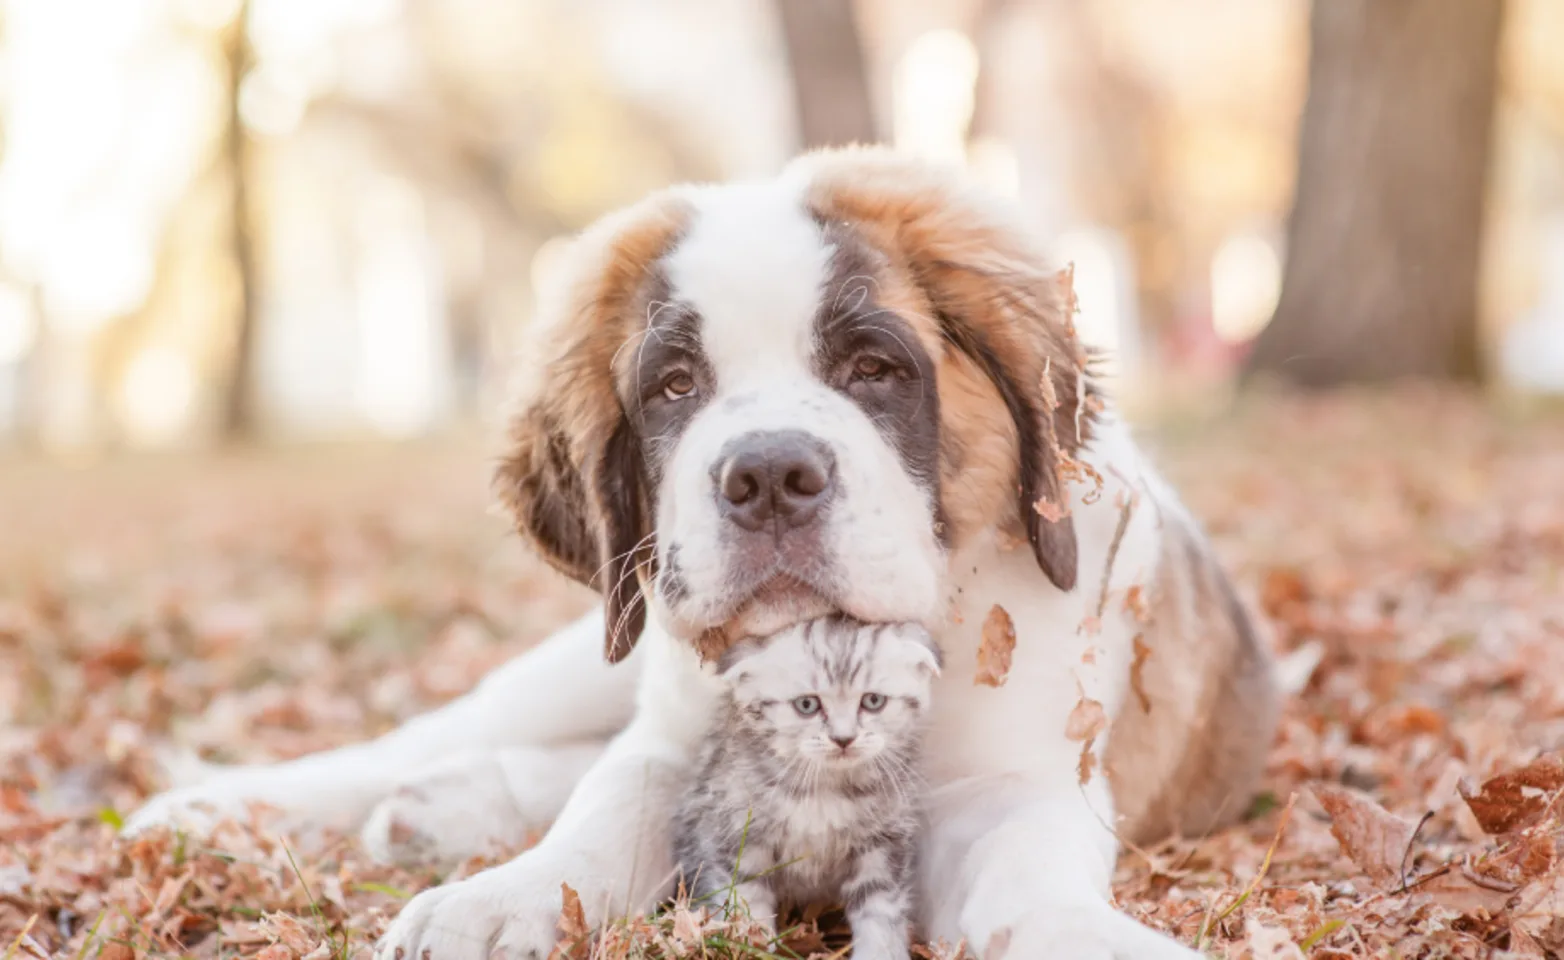 Dog and kitten laying in leaves in a rural outdoor setting